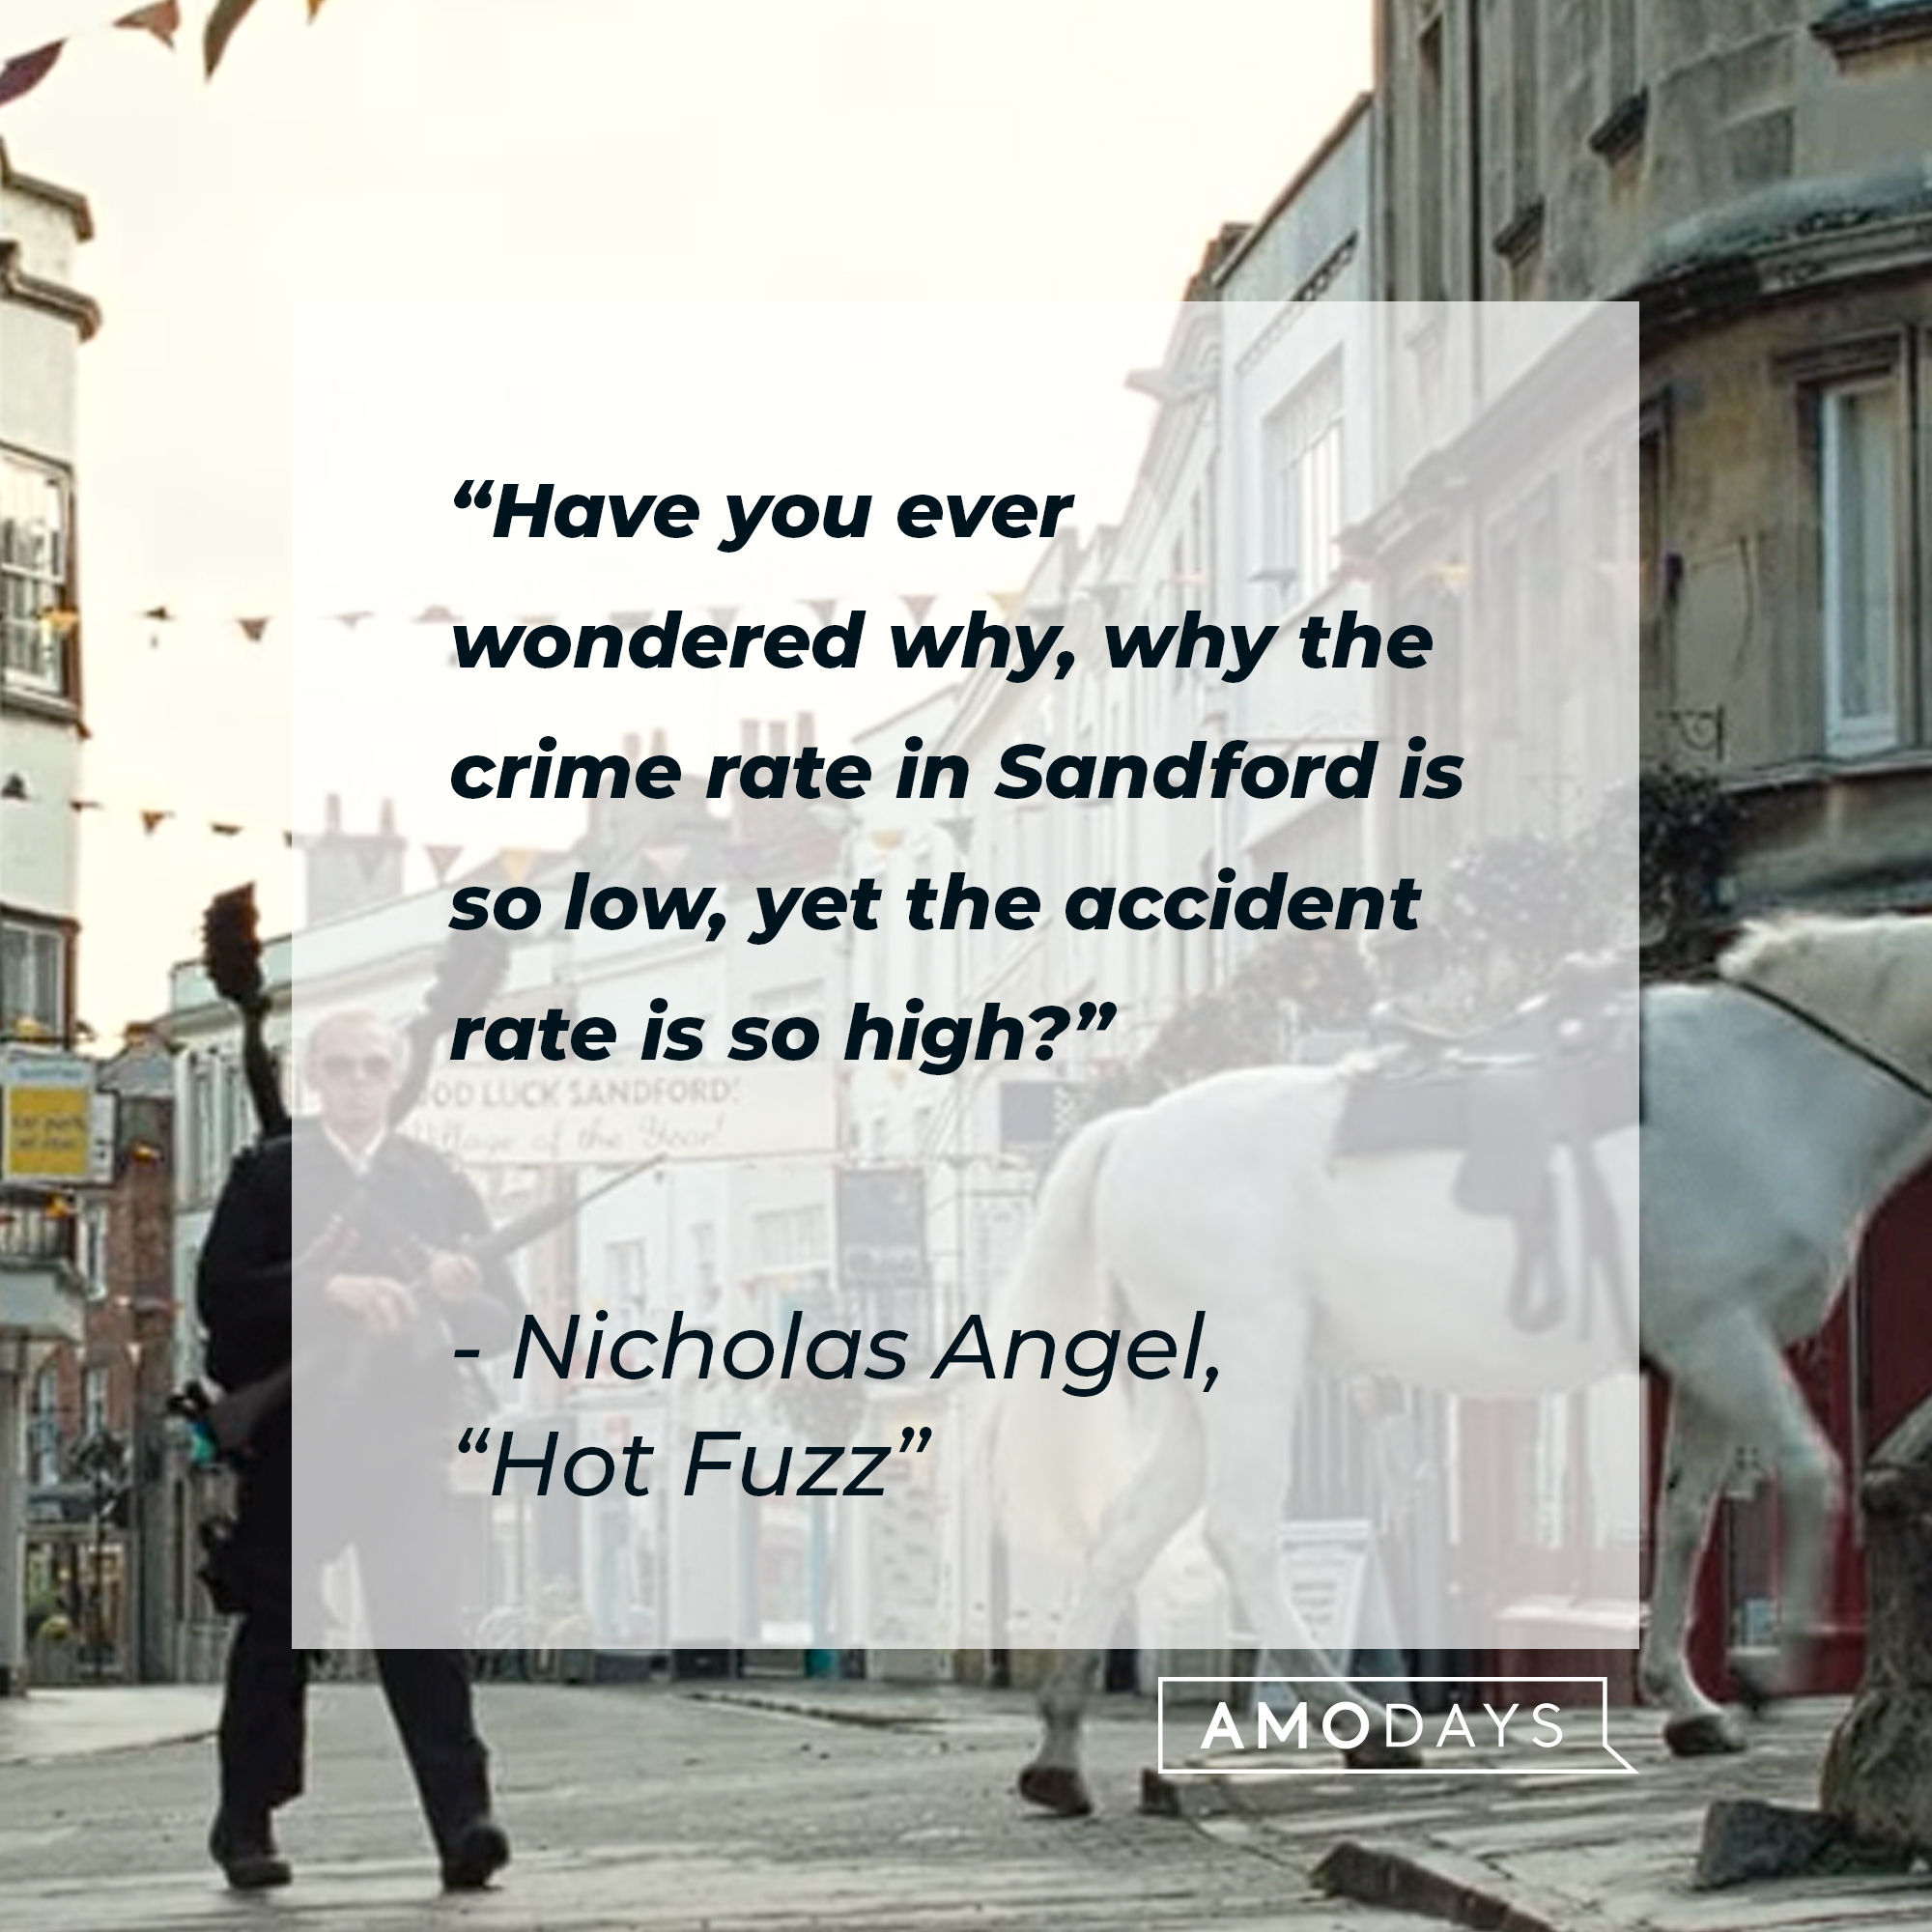 Nicholas Angel's quote in "Hot Fuzz:" “Have you ever wondered why, why the crime rate in Sandford is so low, yet the accident rate is so high?” | Source: Youtube.com/UniversalPictures